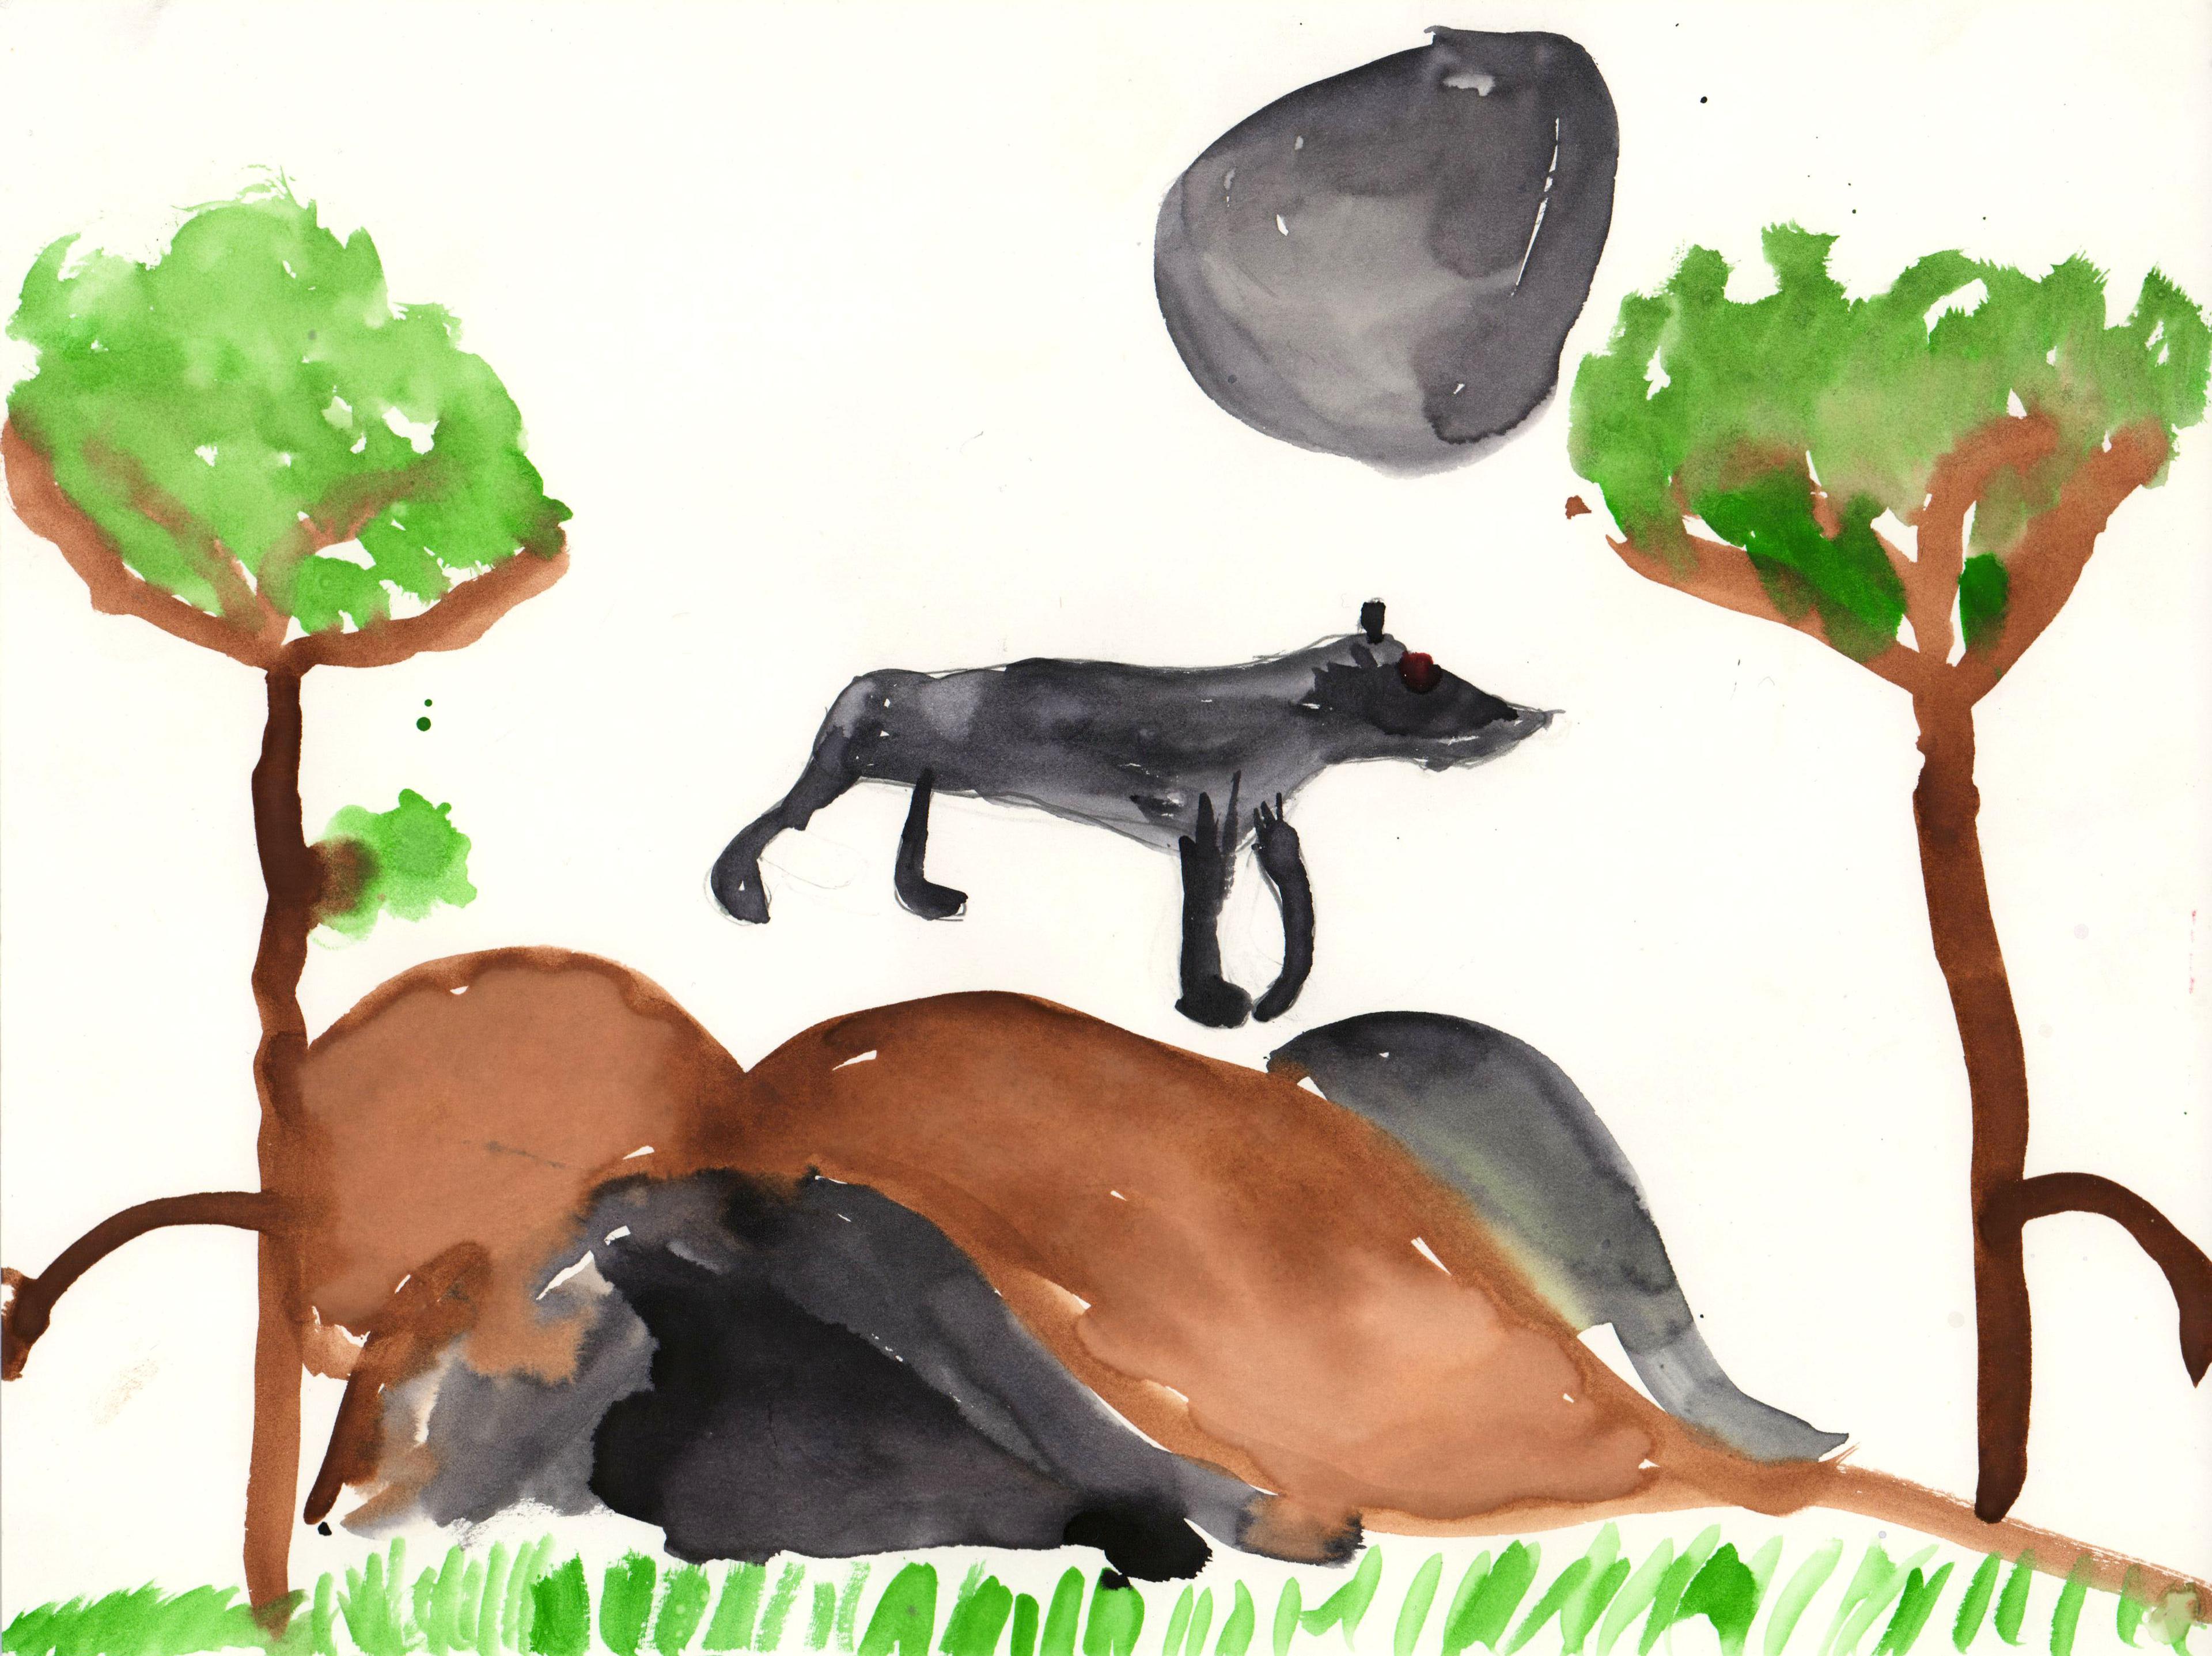 Watercolor painting of a thin black bear facing right and standing centered atop a few large brown and black mounds that rest upon green grass. Tall, thin, brown trees with round green leaves at top stand at the far left and right edges of the painting. A large black circle appears in the sky above the bear, positioned slightly to the right.